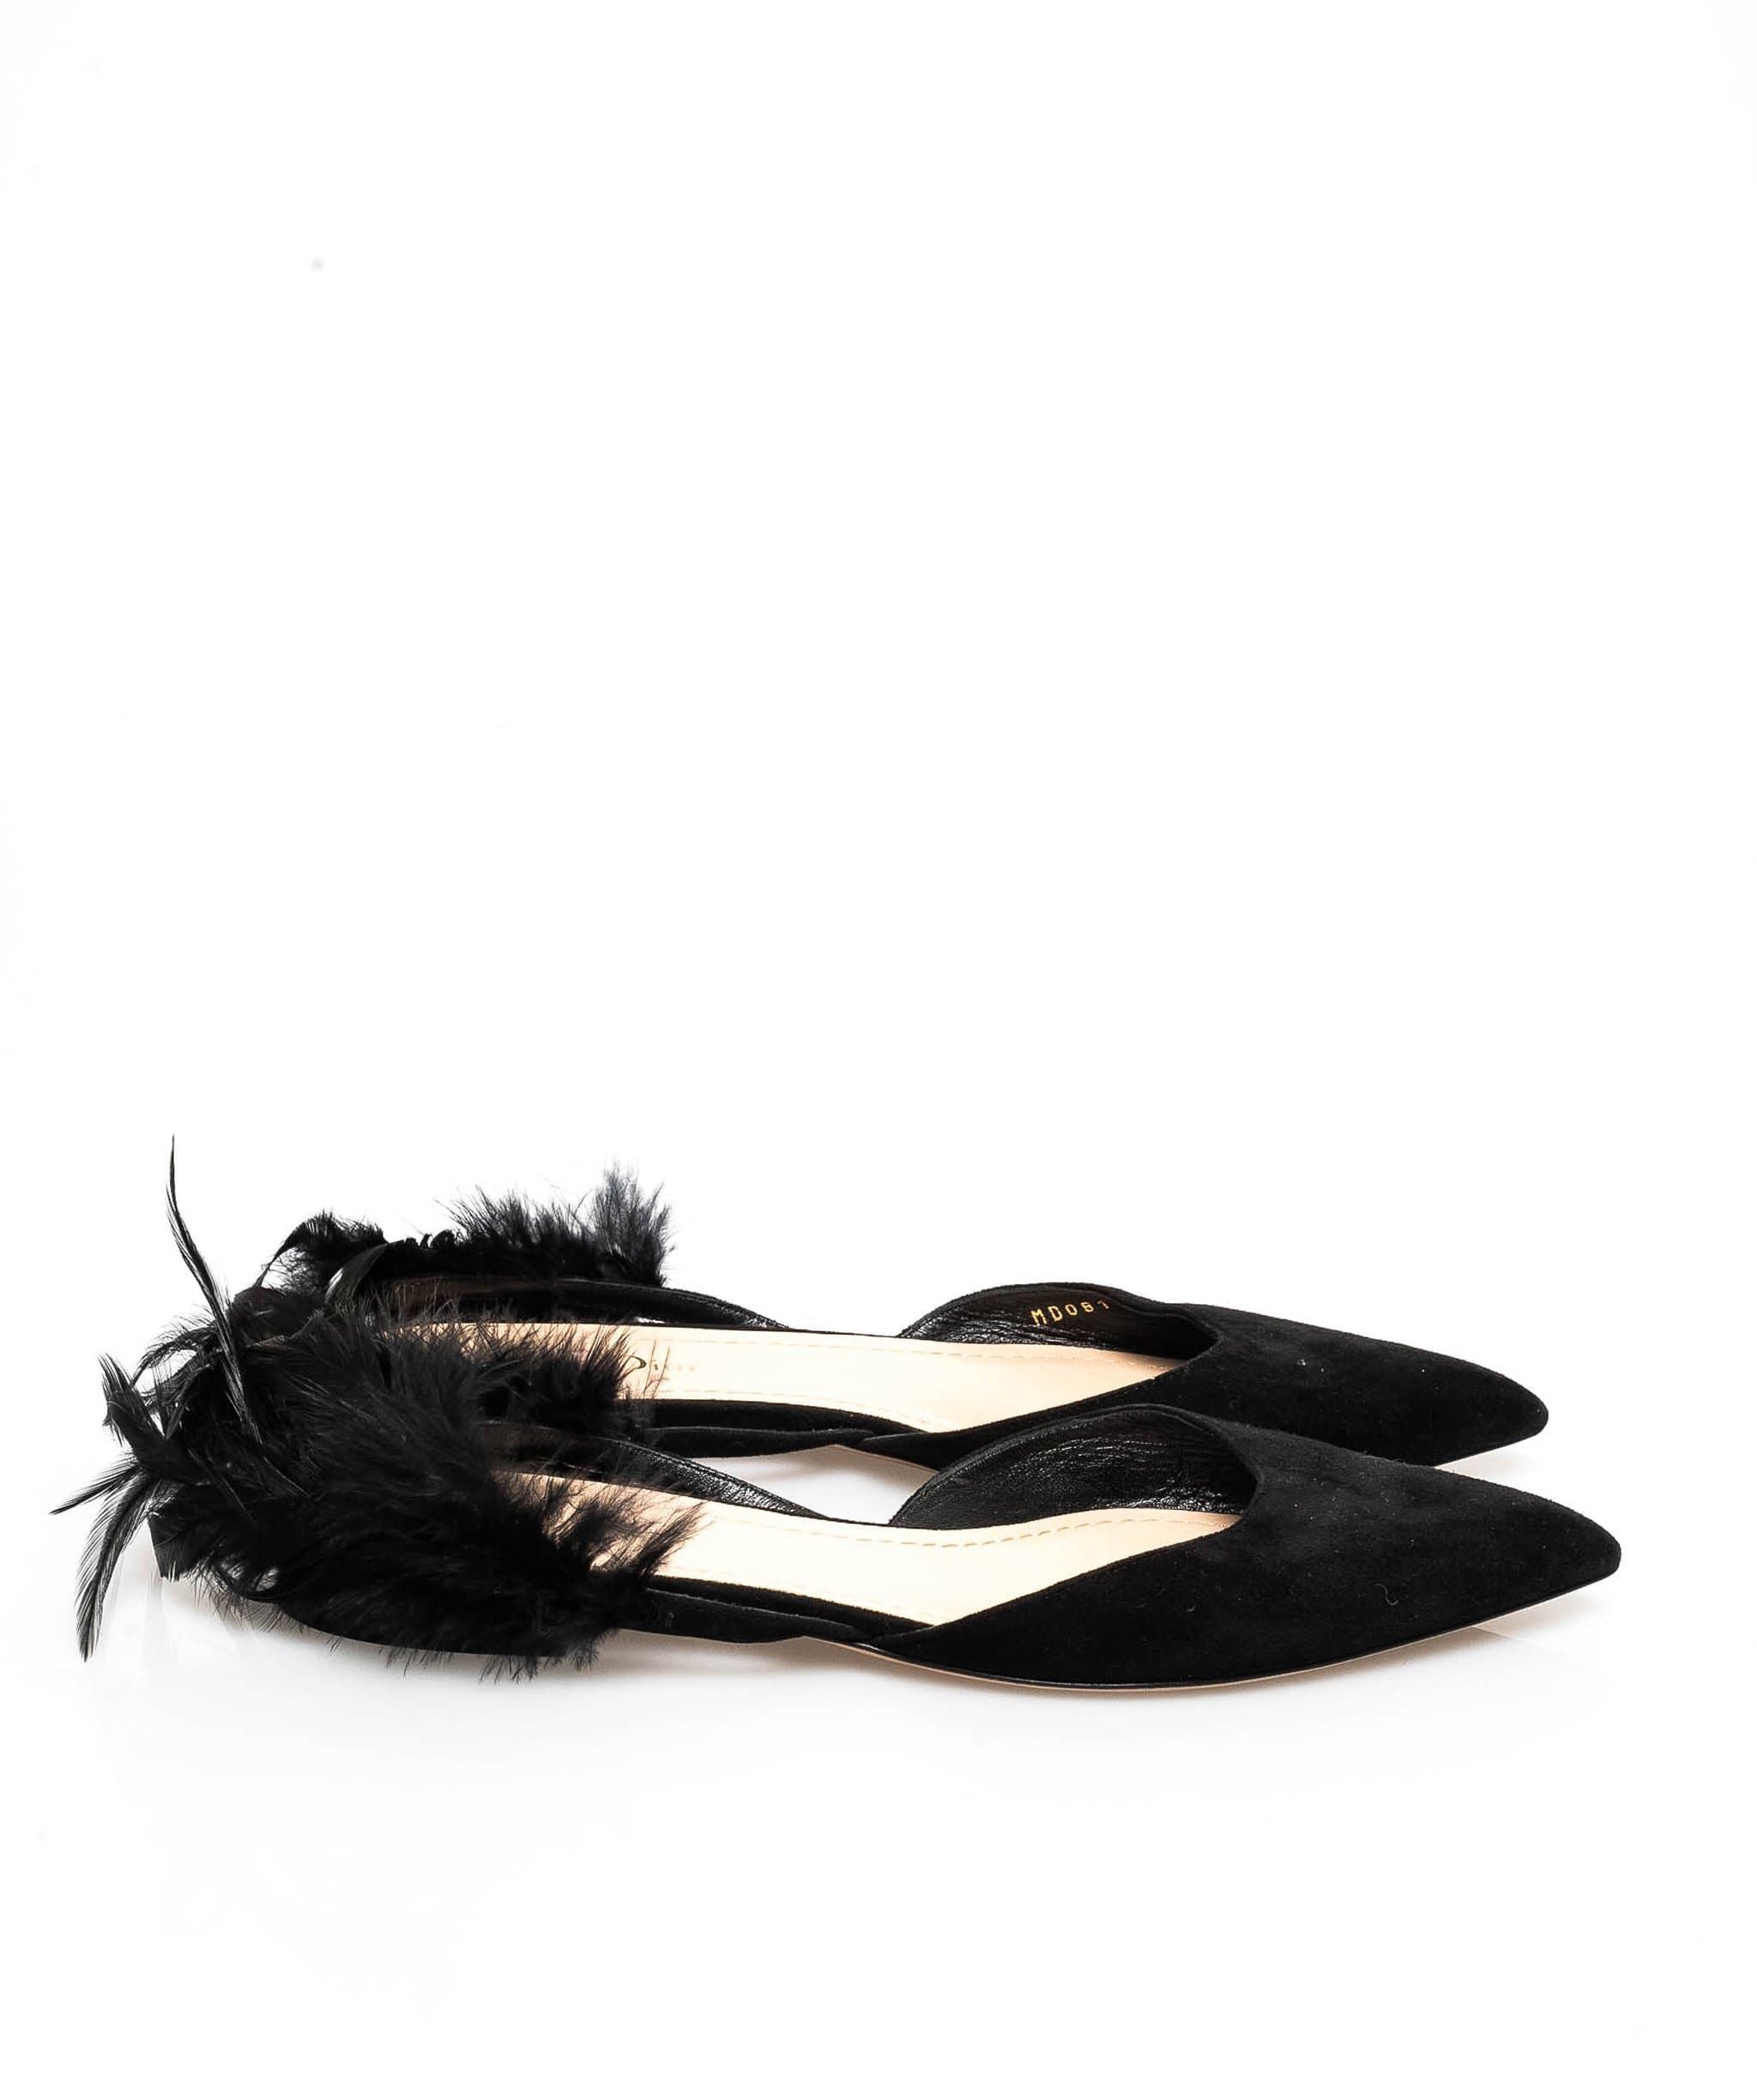 Christian Dior Chistian Dior mules with feathers size 37- MW2132